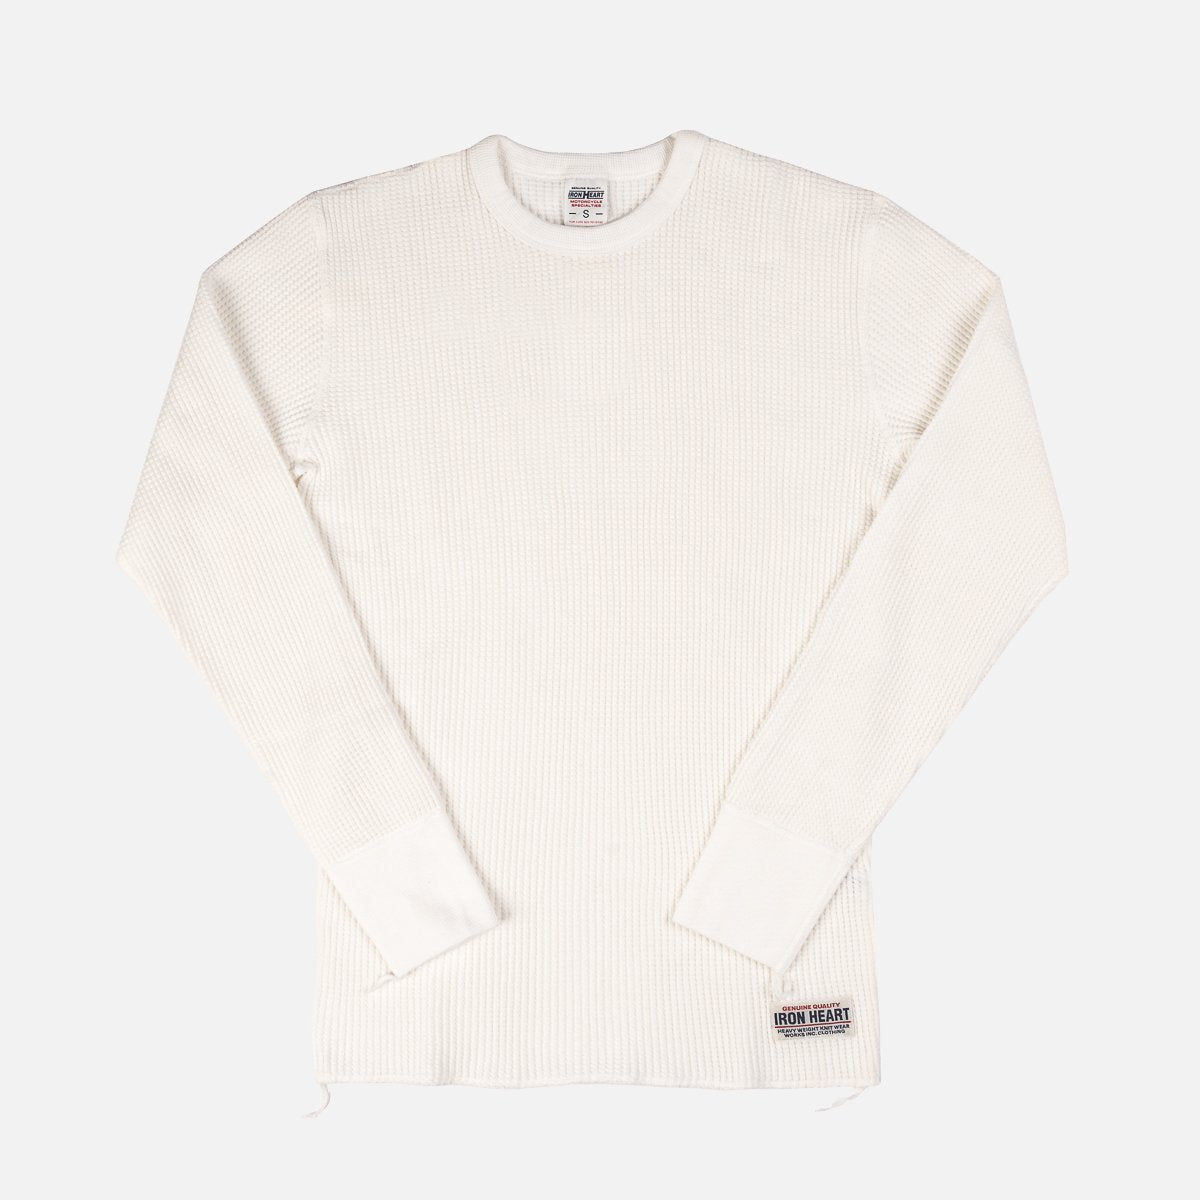 Iron Heart IHTL-1213 Waffle Knit Long Sleeved Thermal Henley - White